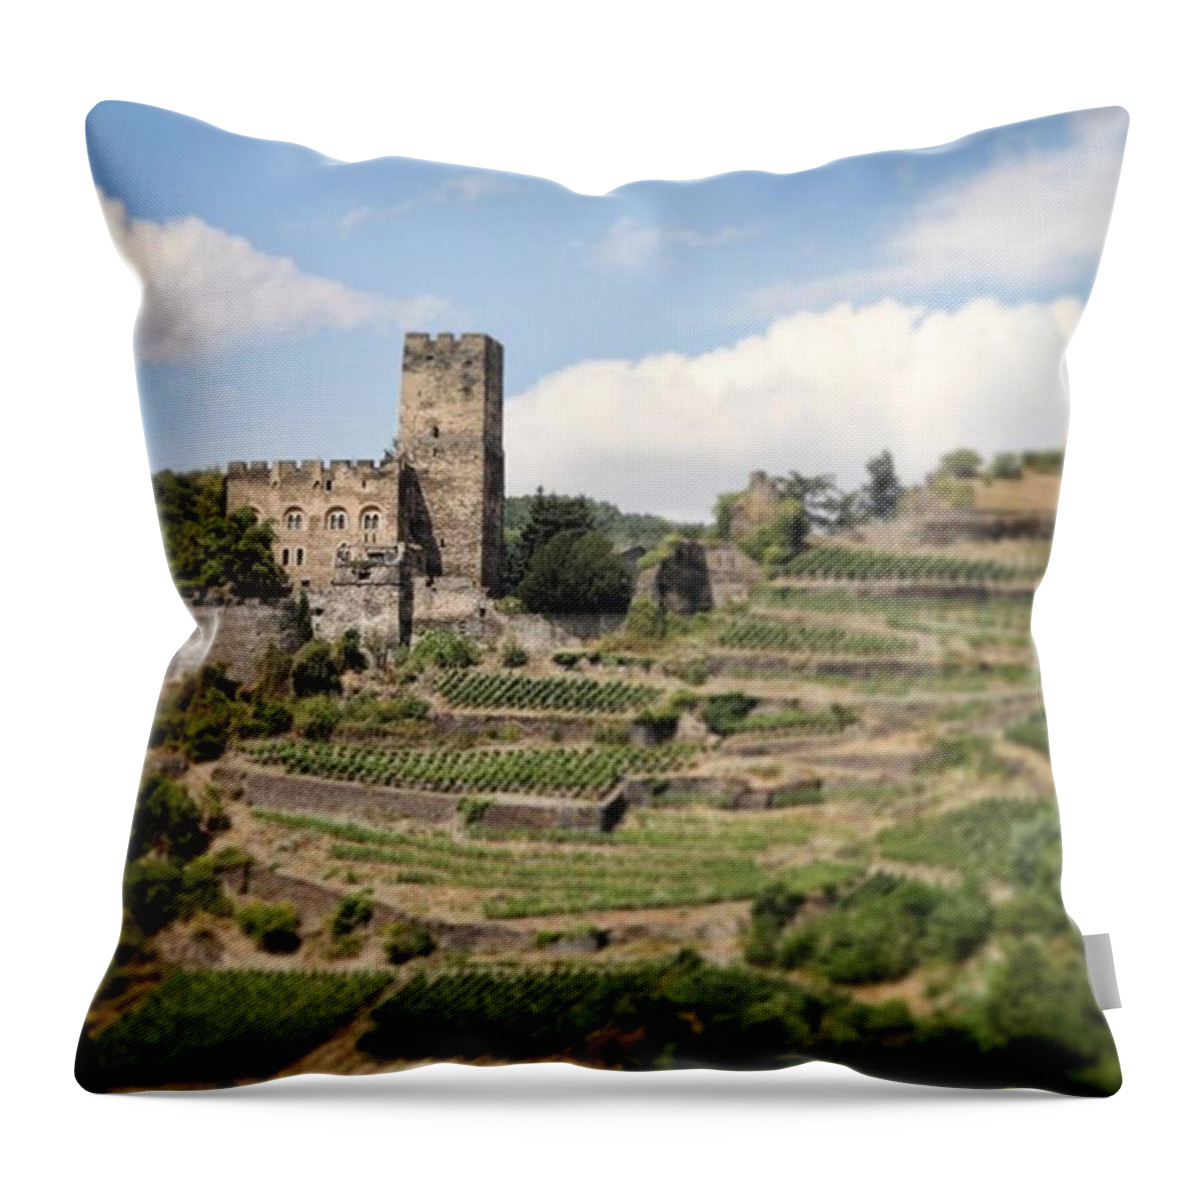 Rhineriver Throw Pillow featuring the photograph Rhine River Castle and Winery by Nancy Ingersoll